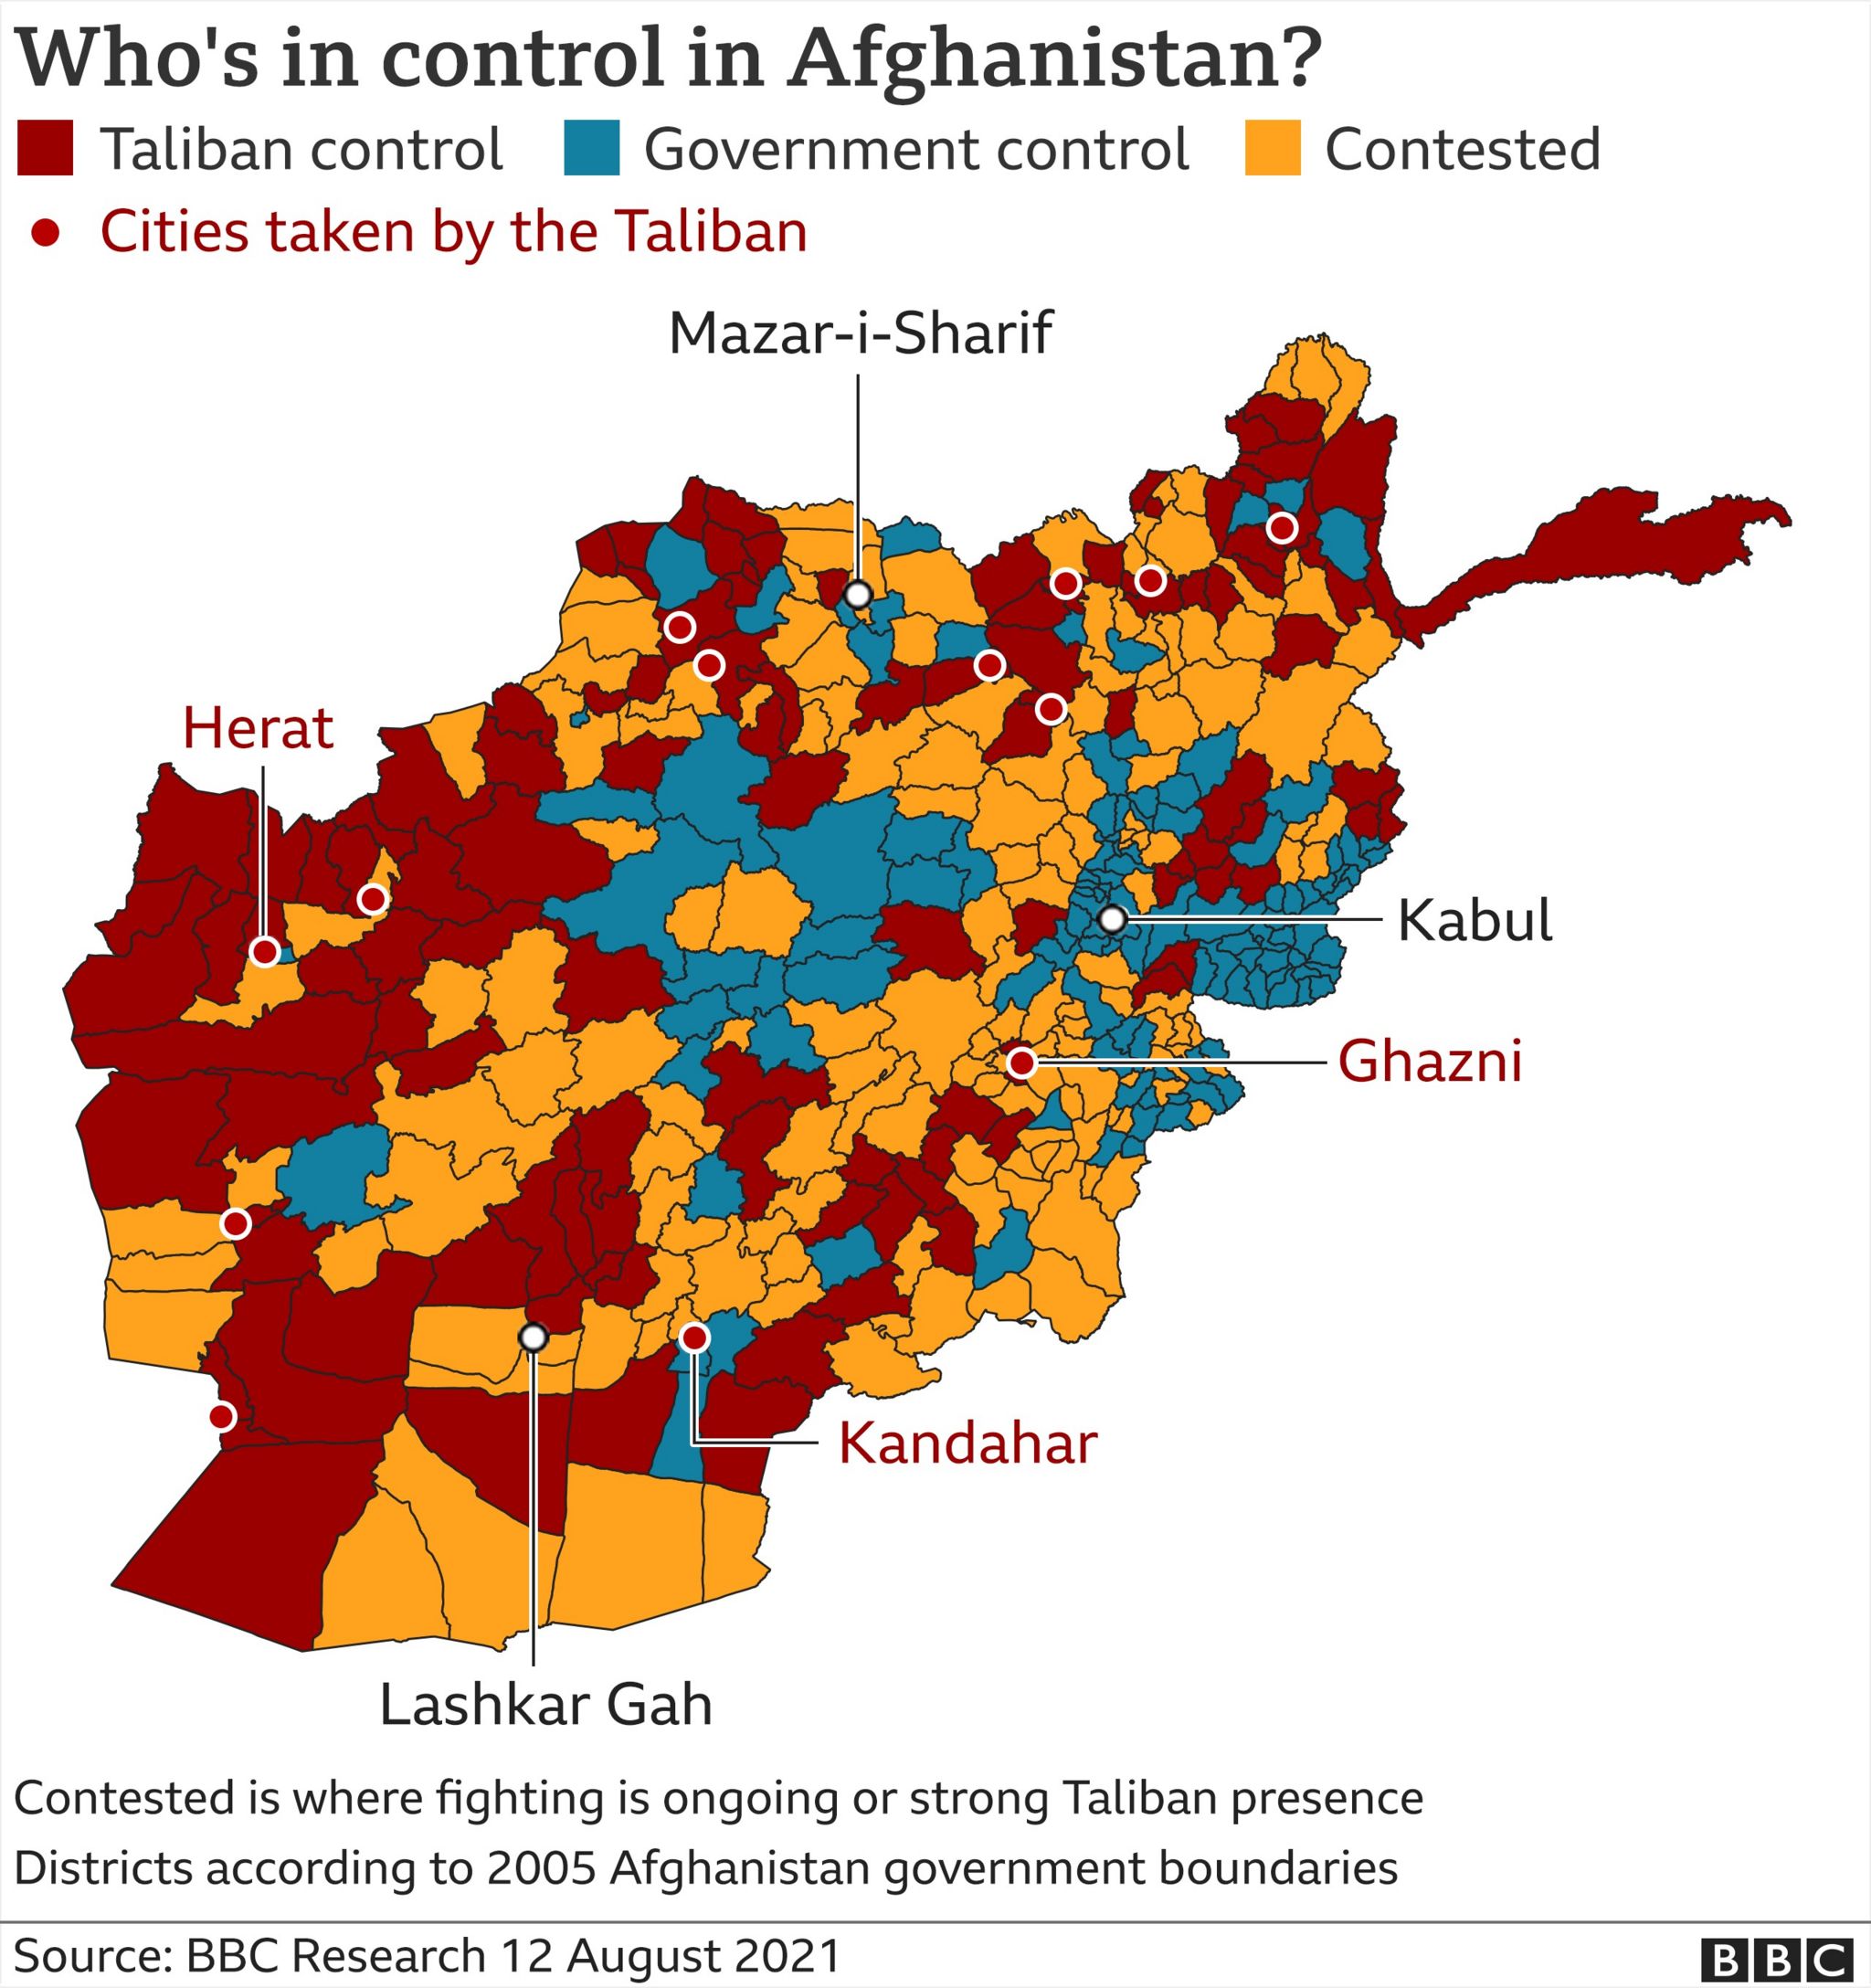 Kandahar - Map showing who is control of districts in Afghanistan